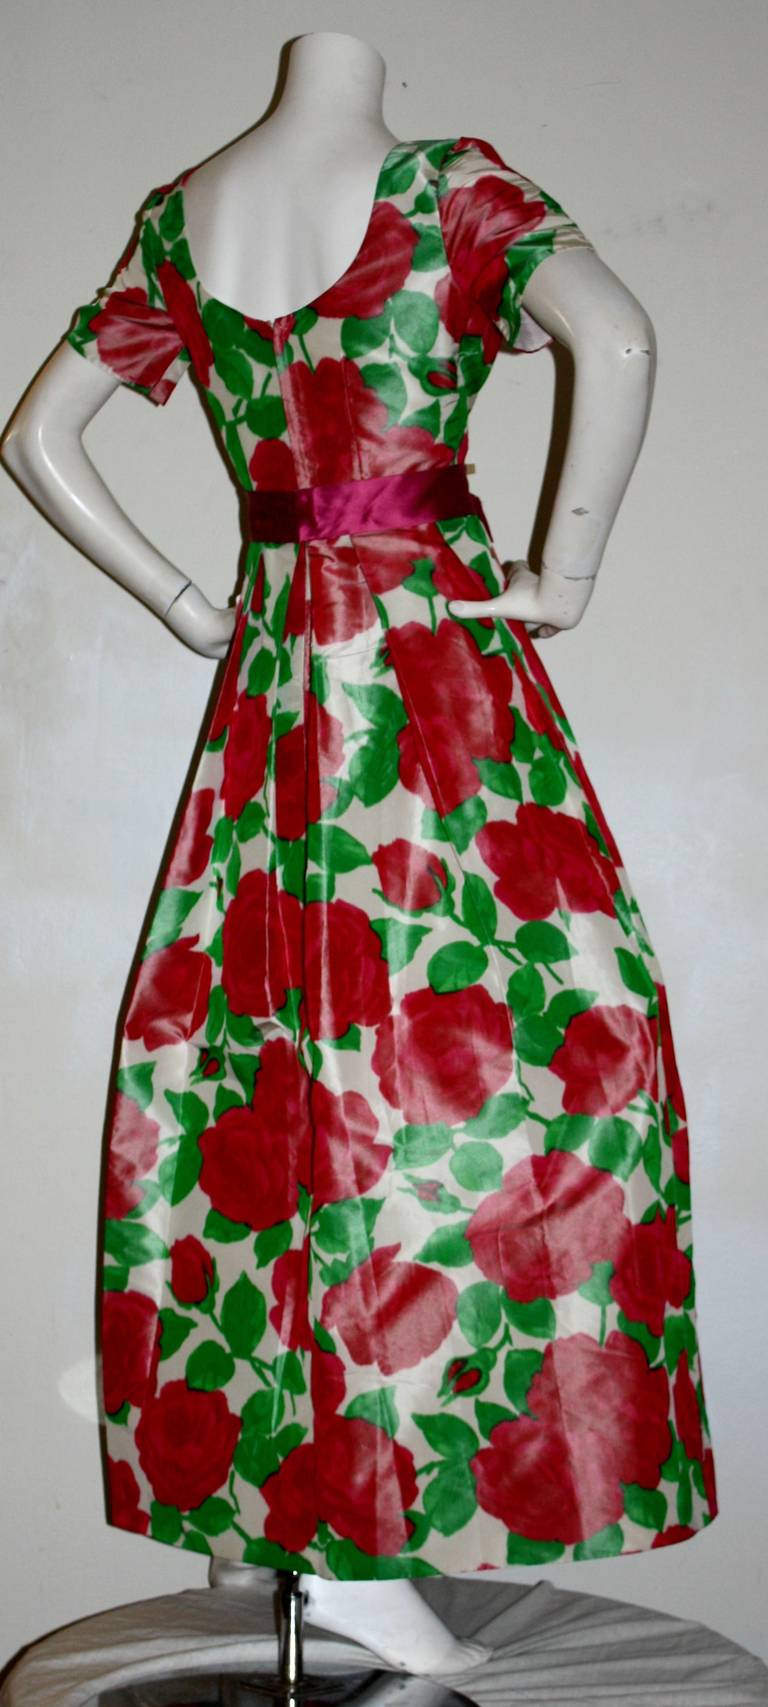 Stunning vintage Richilene for Elizabeth Arden silk taffeta gown, featuring all-over hot pink floral print, mixed with green foliage. Features matching attached silk velvet bow belt that snaps in back. Flattering scoop neckline. Would also look